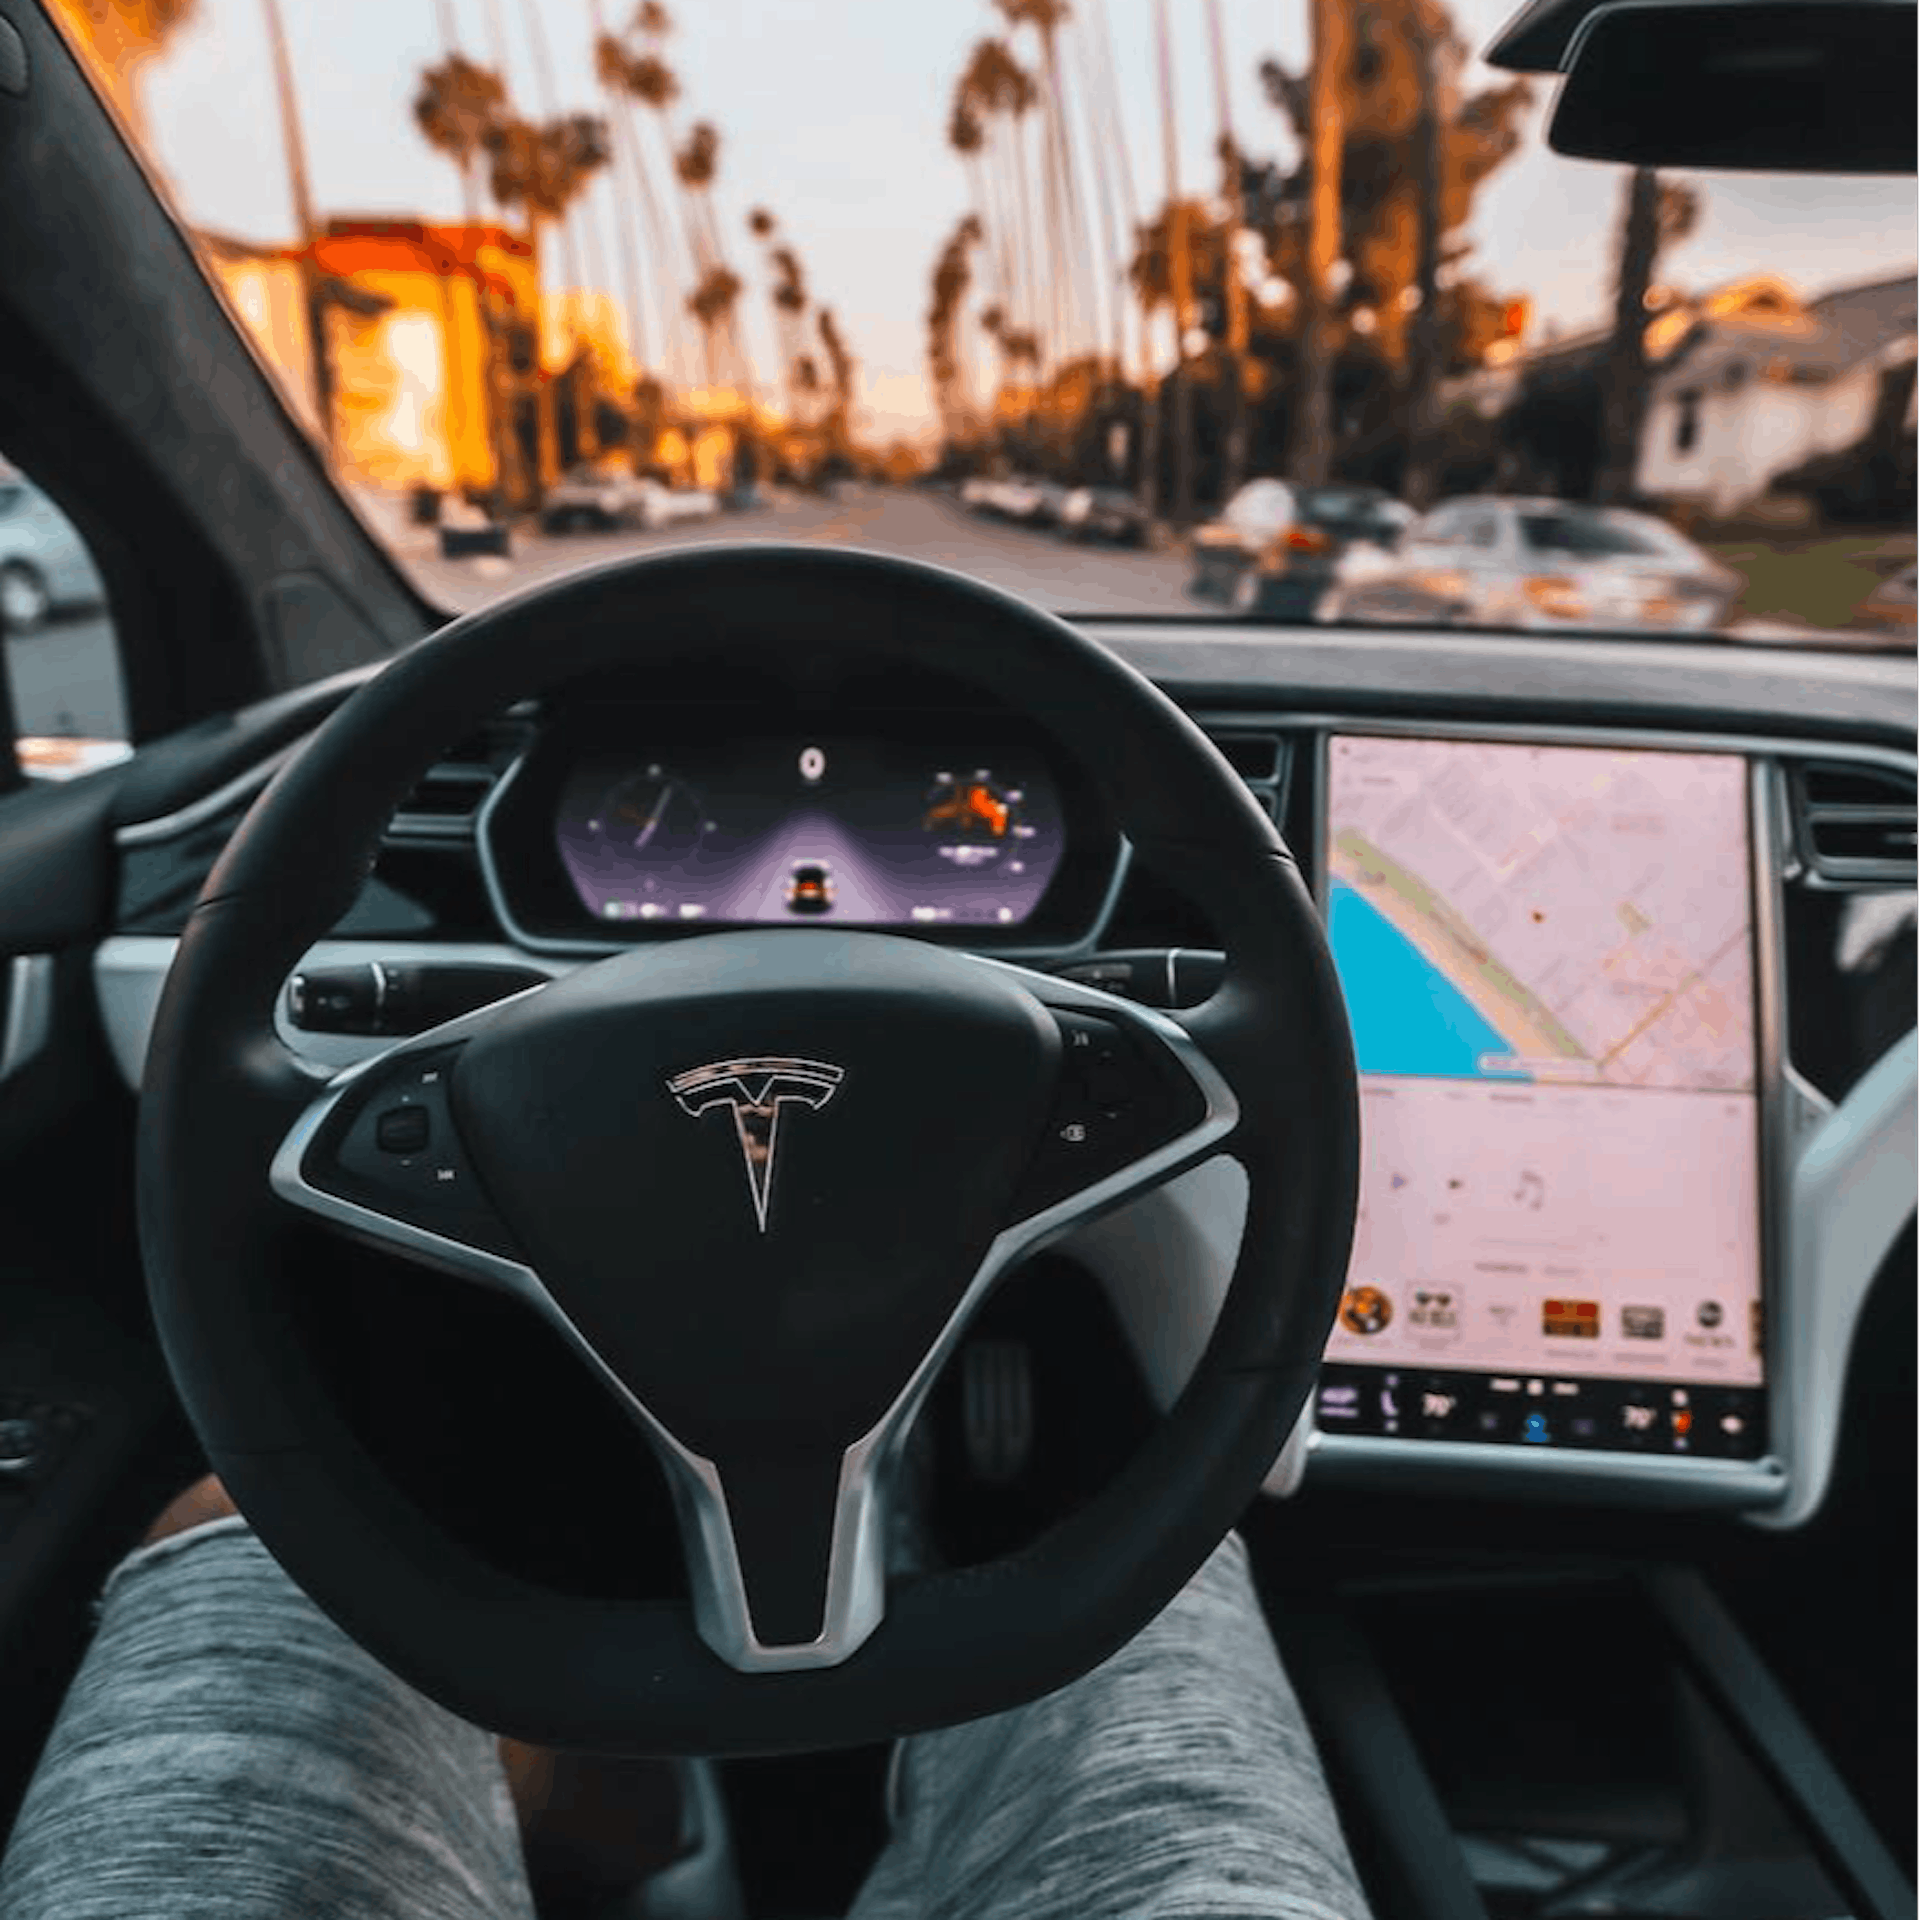 featured image - How Tesla Emerged And Disrupted The Automotive Industry